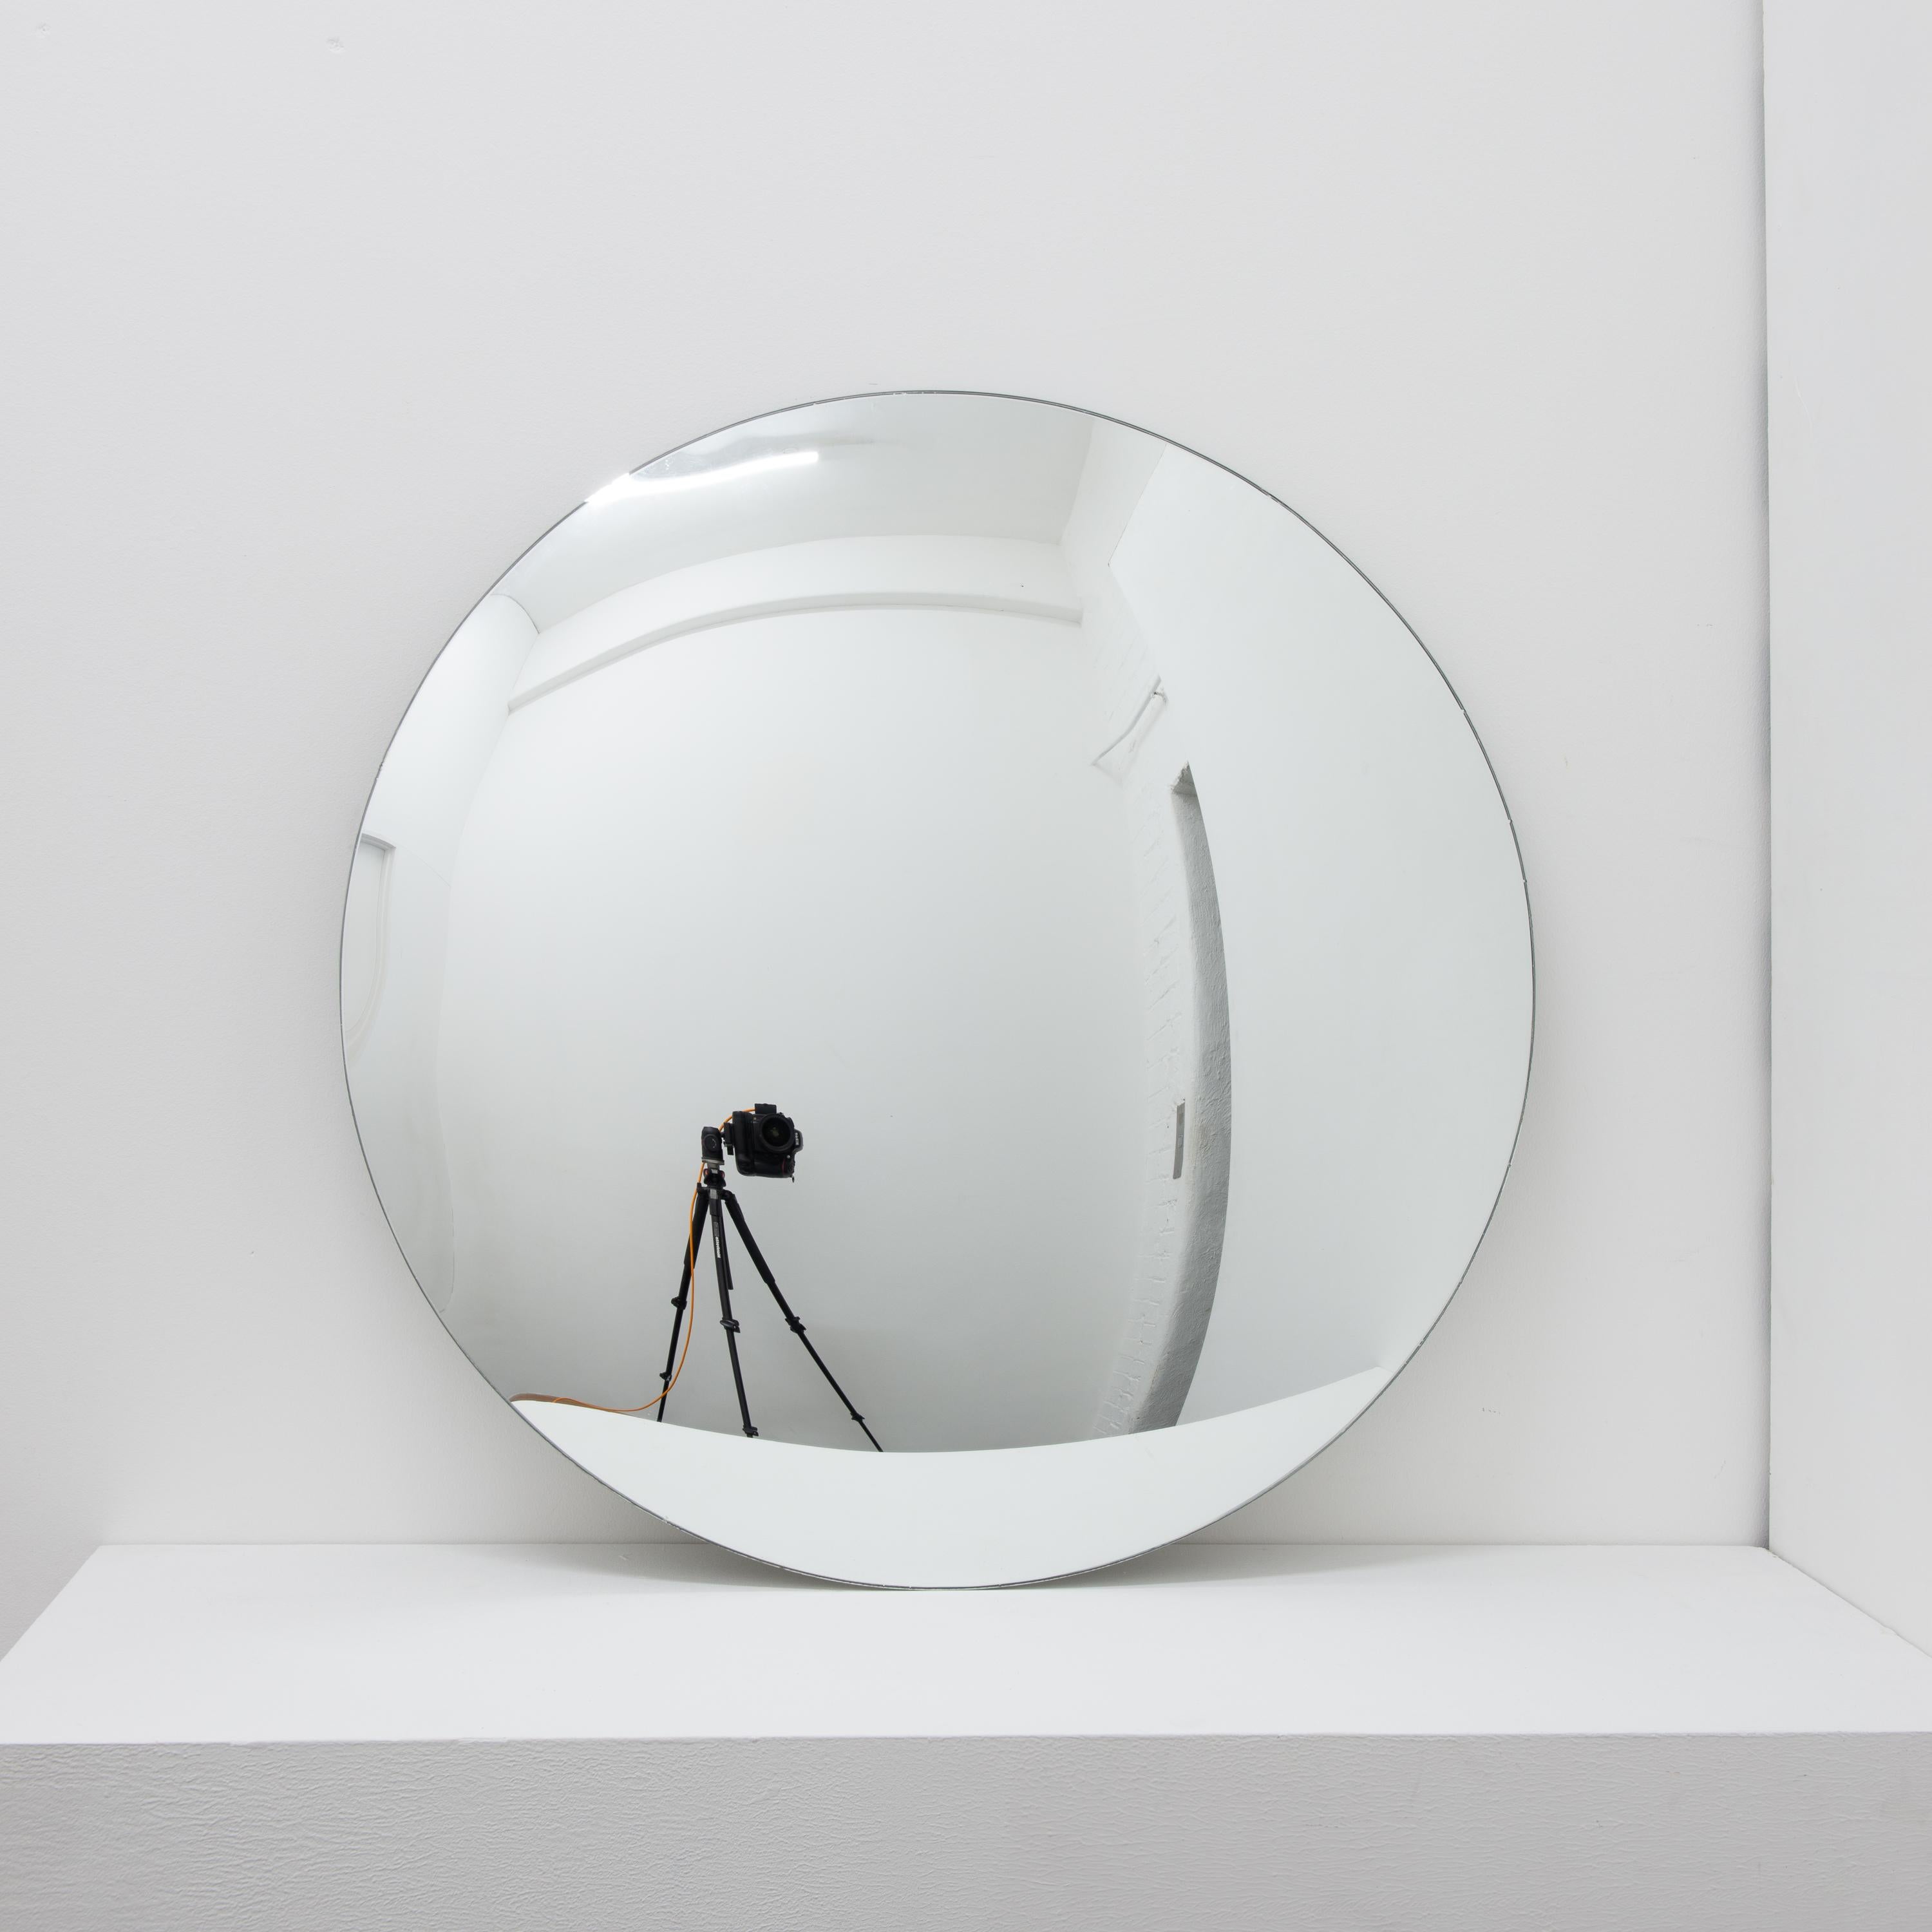 Orbis Convex Handcrafted Minimalist Frameless Round Mirror, XL In New Condition For Sale In London, GB